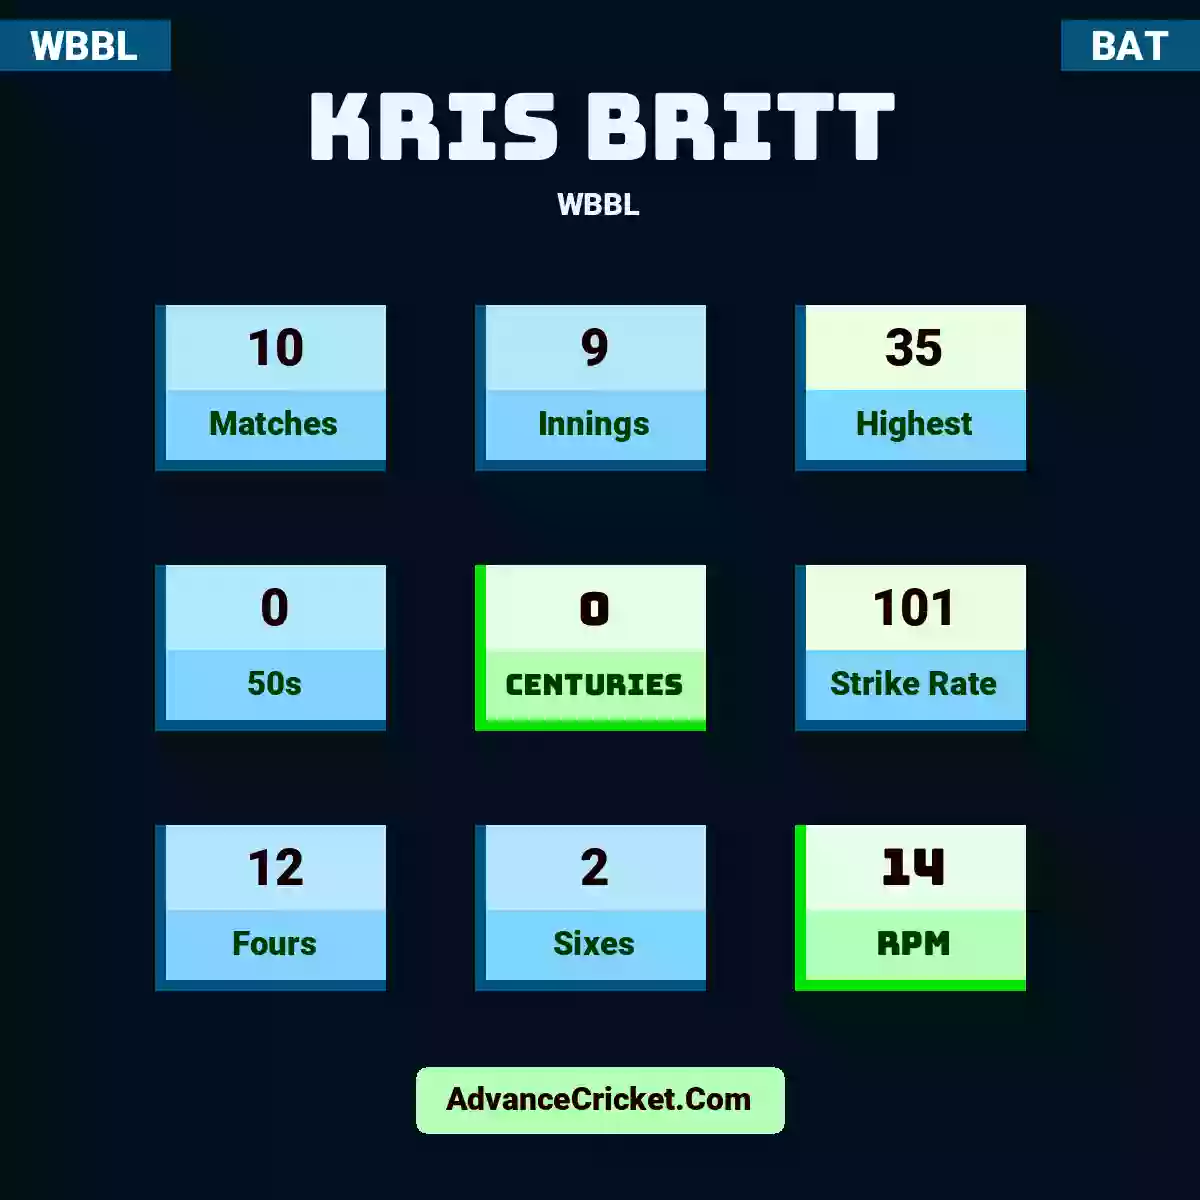 Kris Britt WBBL , Kris Britt played 10 matches, scored 35 runs as highest, 0 half-centuries, and 0 centuries, with a strike rate of 101. K.Britt hit 12 fours and 2 sixes, with an RPM of 14.